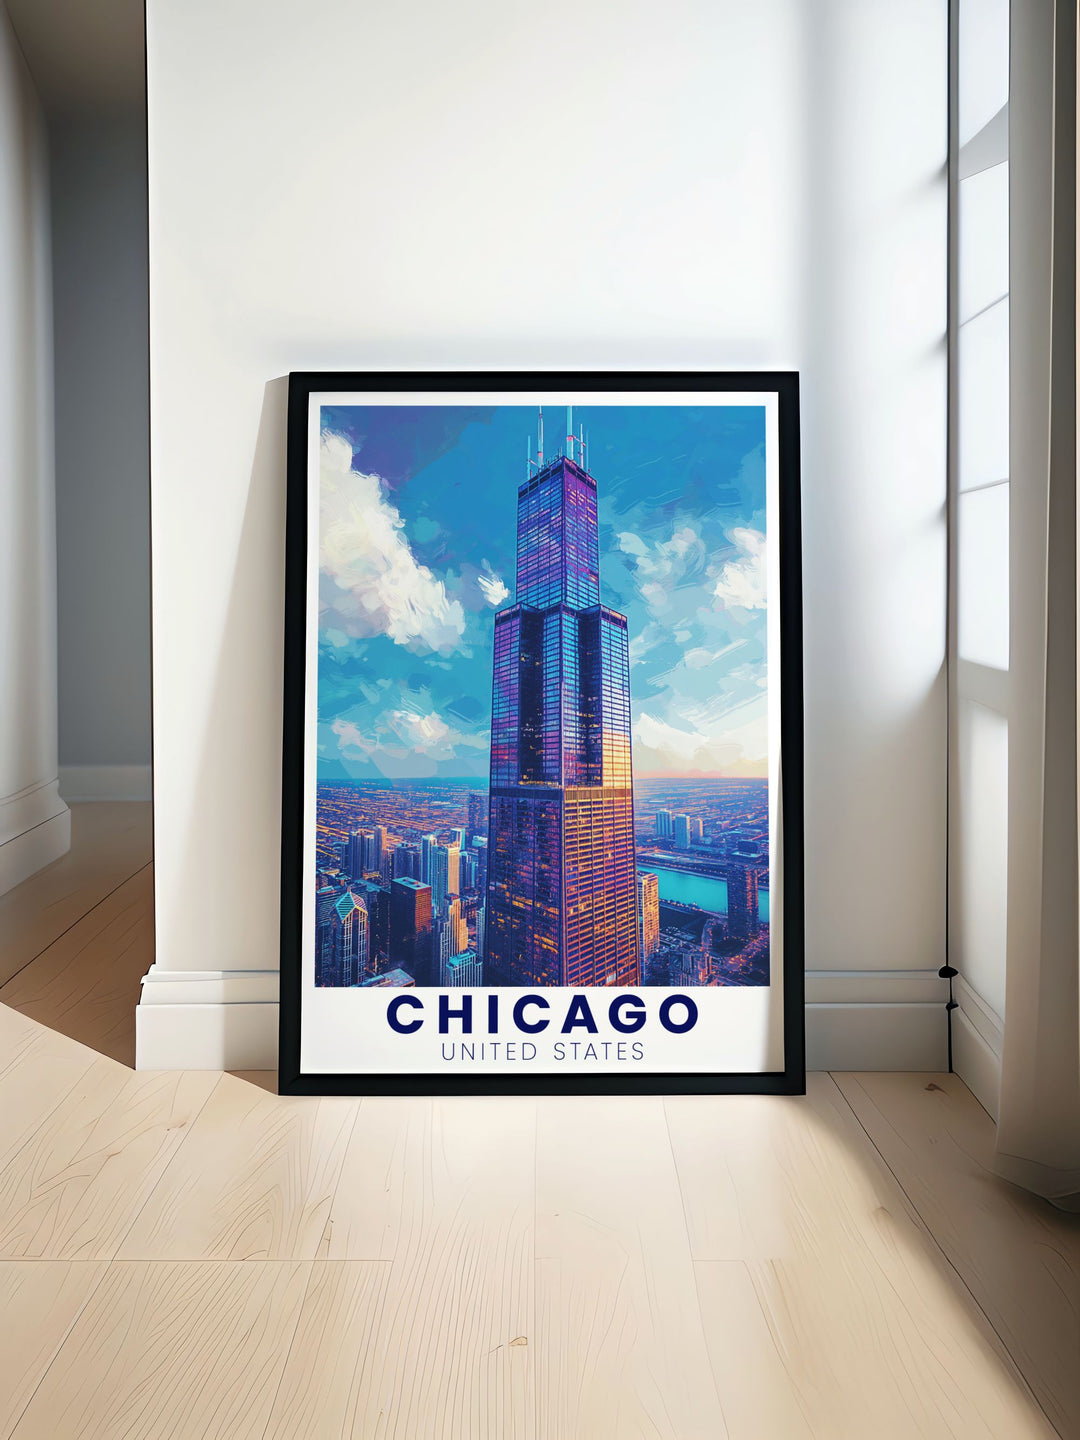 A vibrant Chicago skyline poster featuring Willis Tower in the background ideal for adding a touch of city charm to your home decor and making a unique Chicago gift with detailed city map and vintage style.